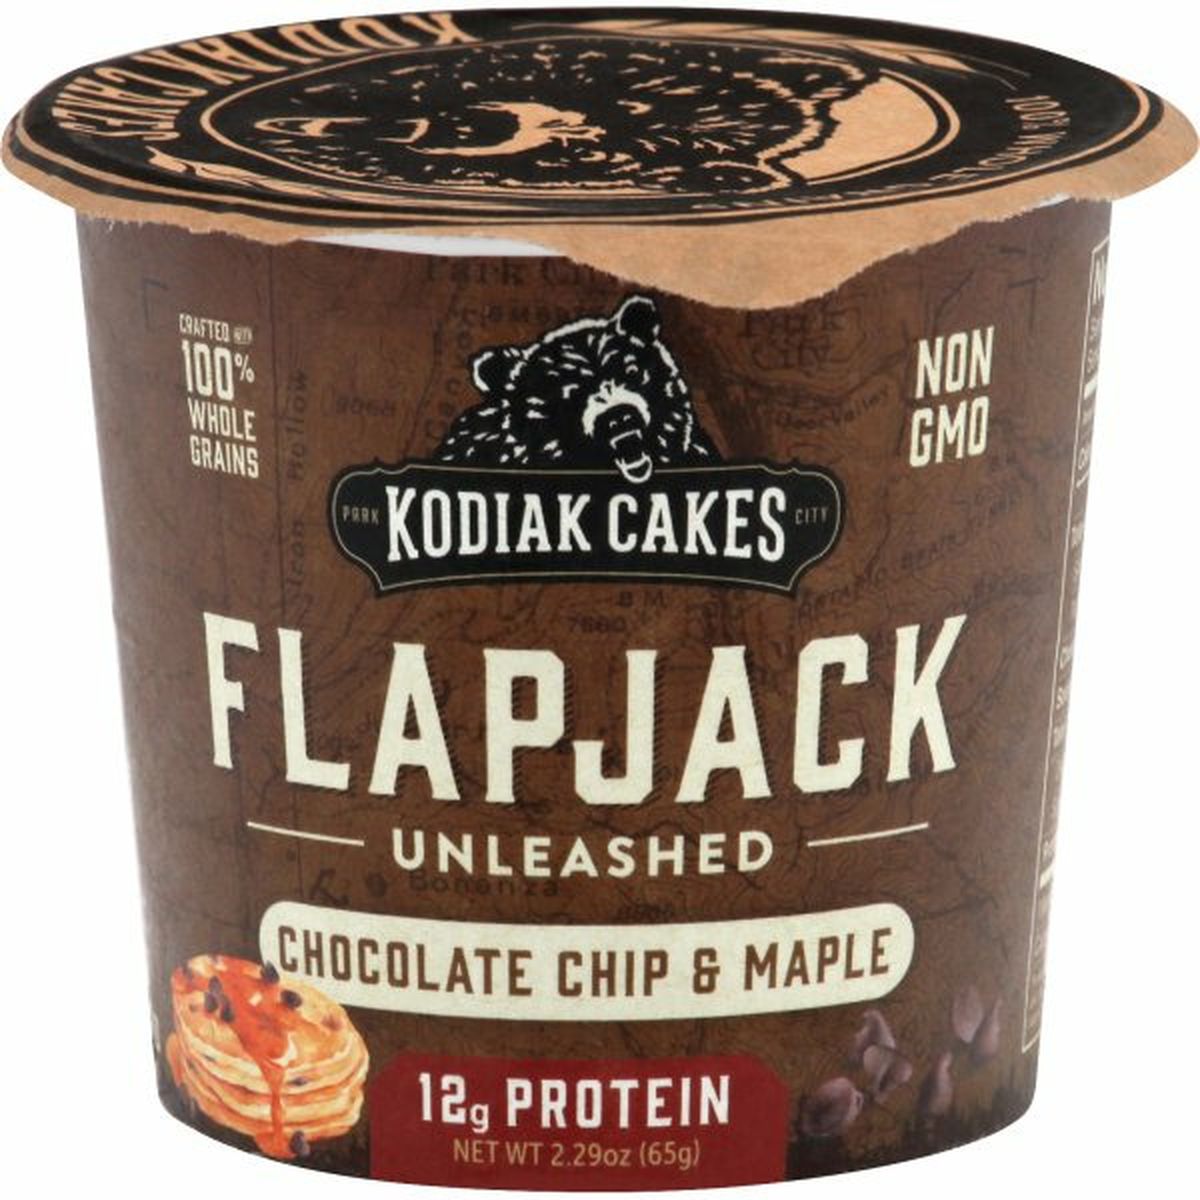 Calories in Kodiak Cakes Flapjack, Unleashed, Chocolate Chip & Maple